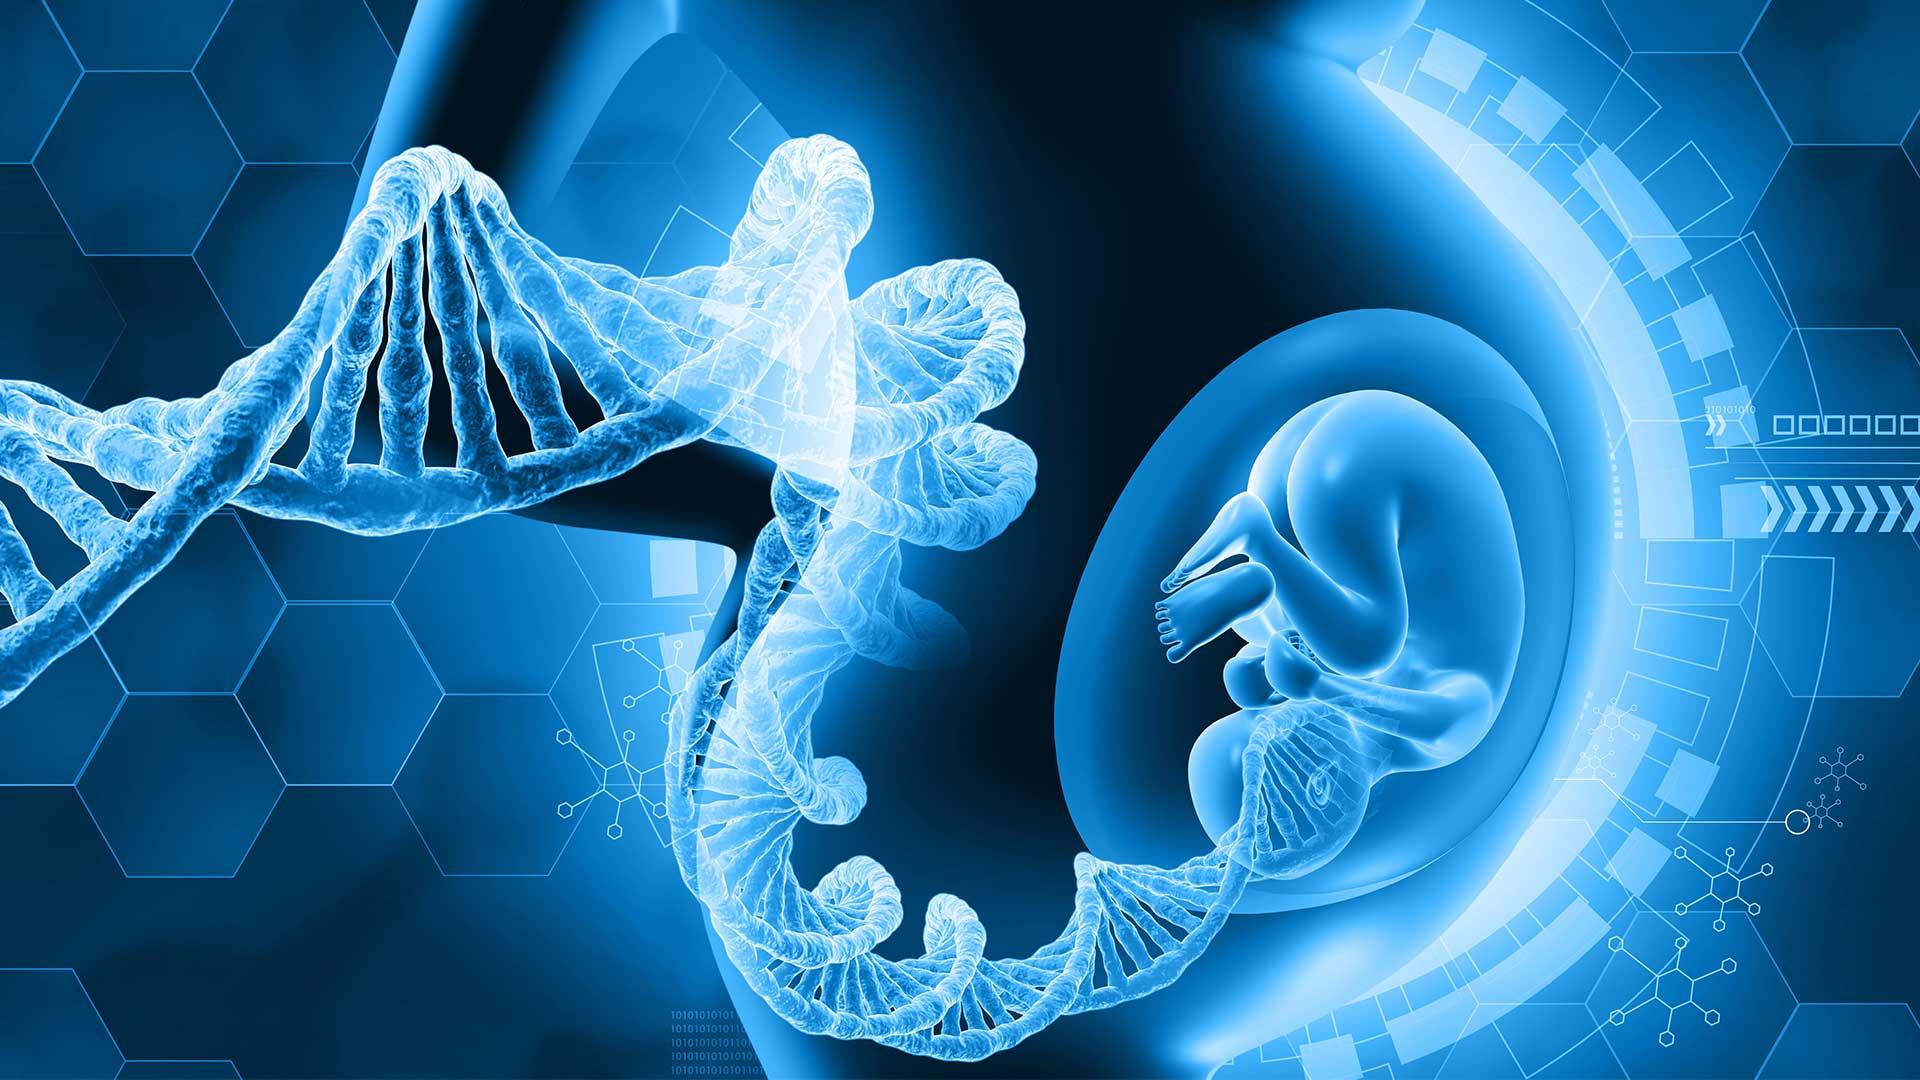 An illustration of an embryo in a womb, with a DNA strand in front.